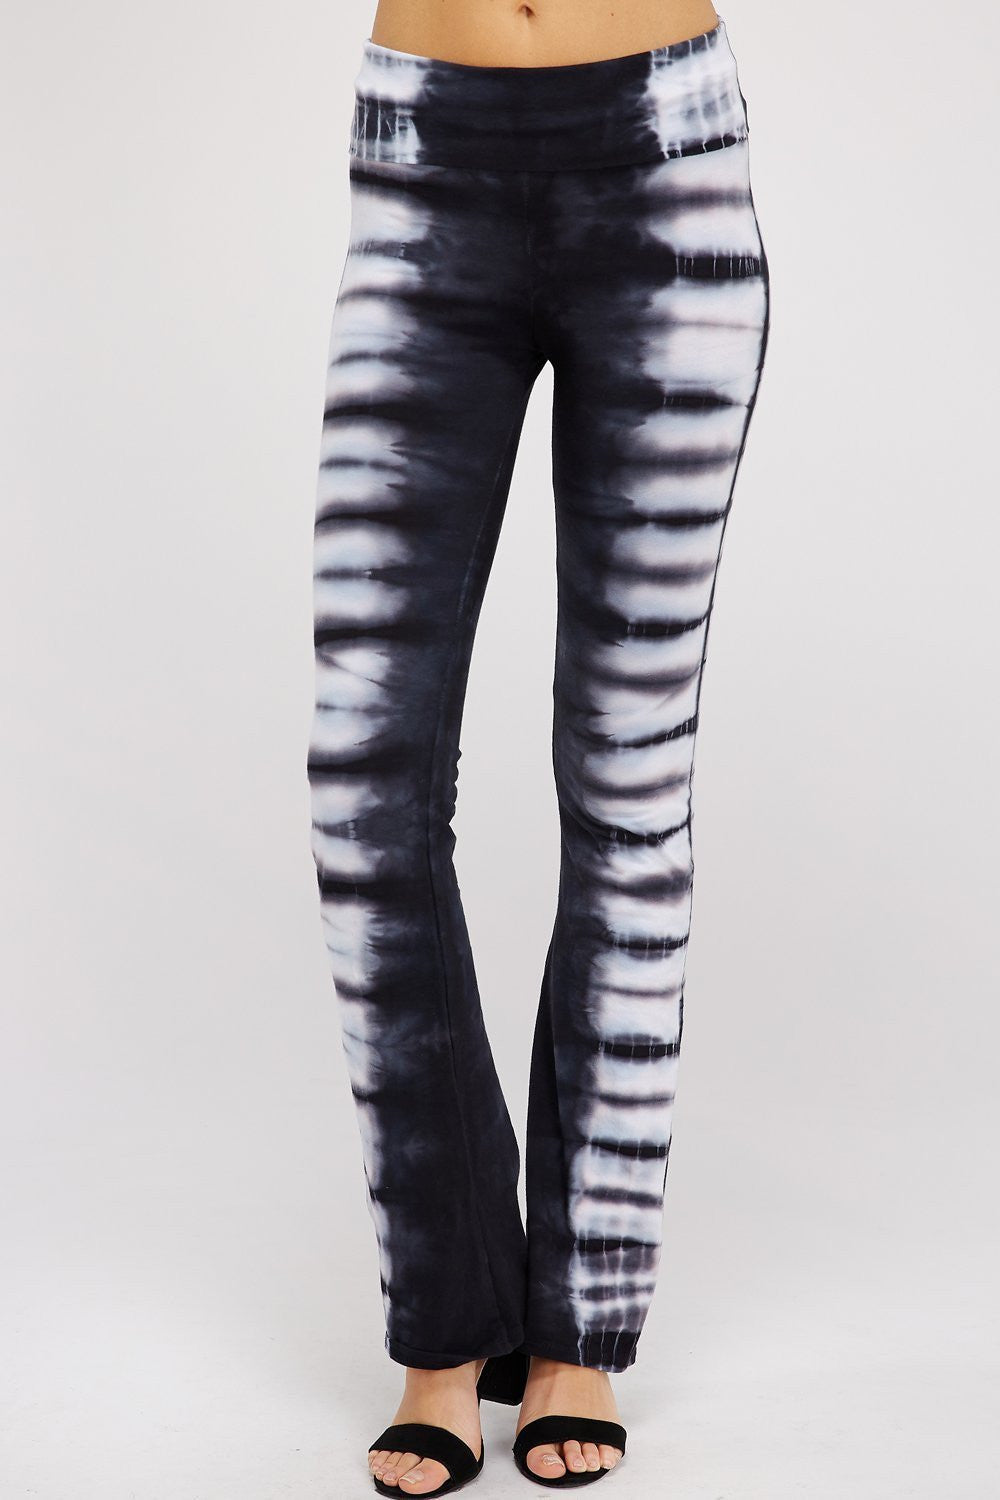  Black & White chic striped tie dye and fold over band yoga pants